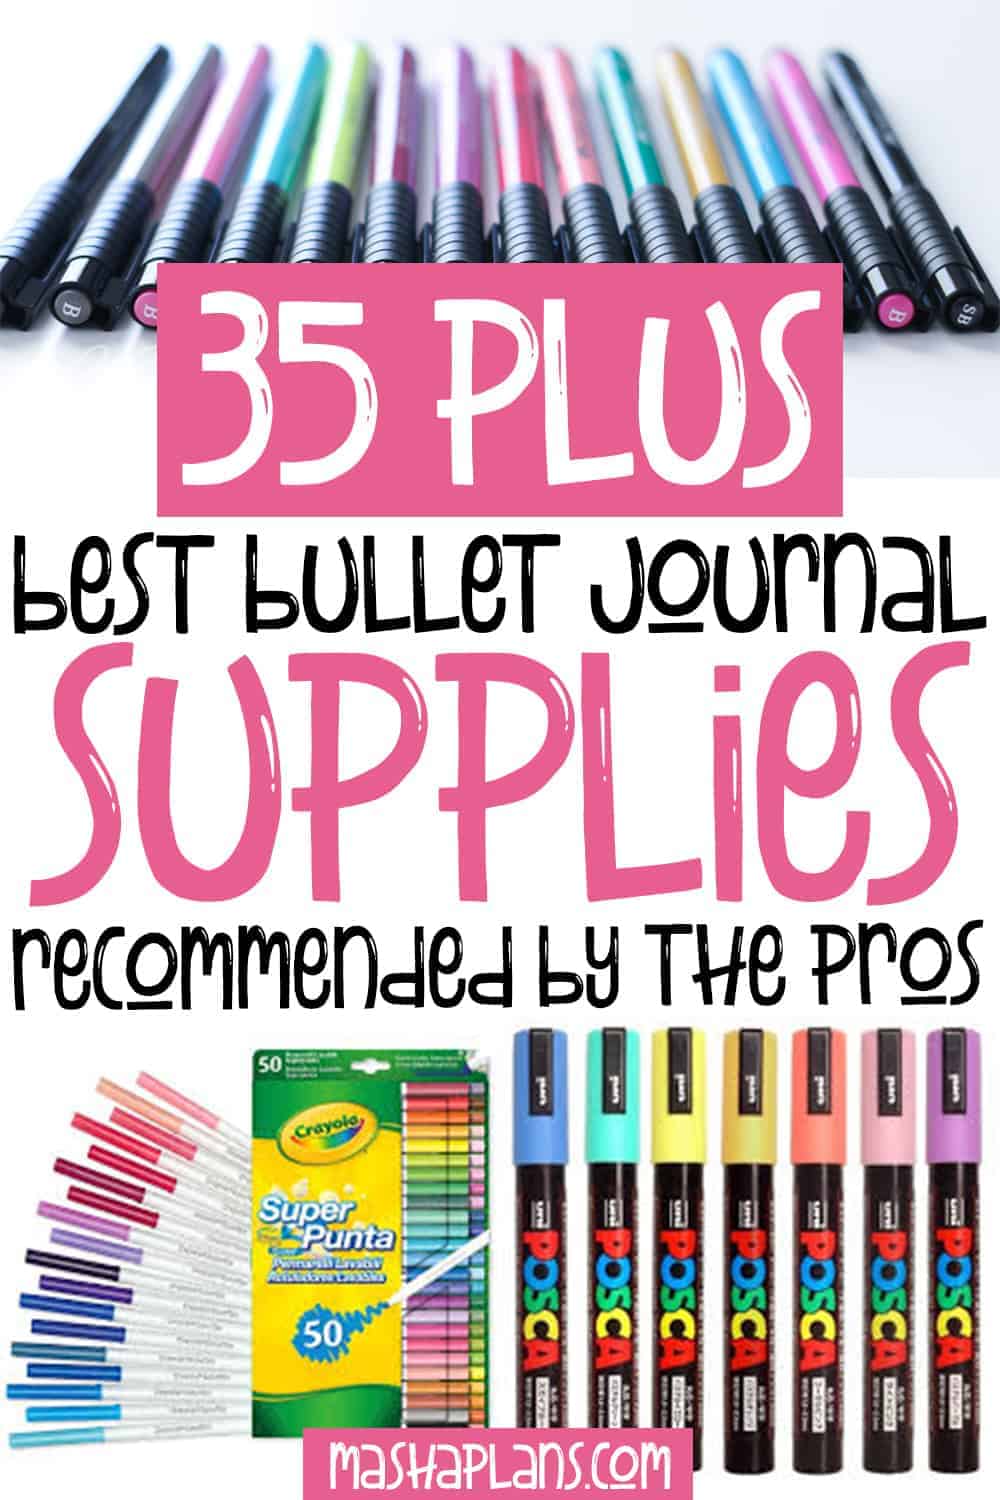 35+ Best Bullet Journal Supplies Recommended By The Pros | Masha Plans